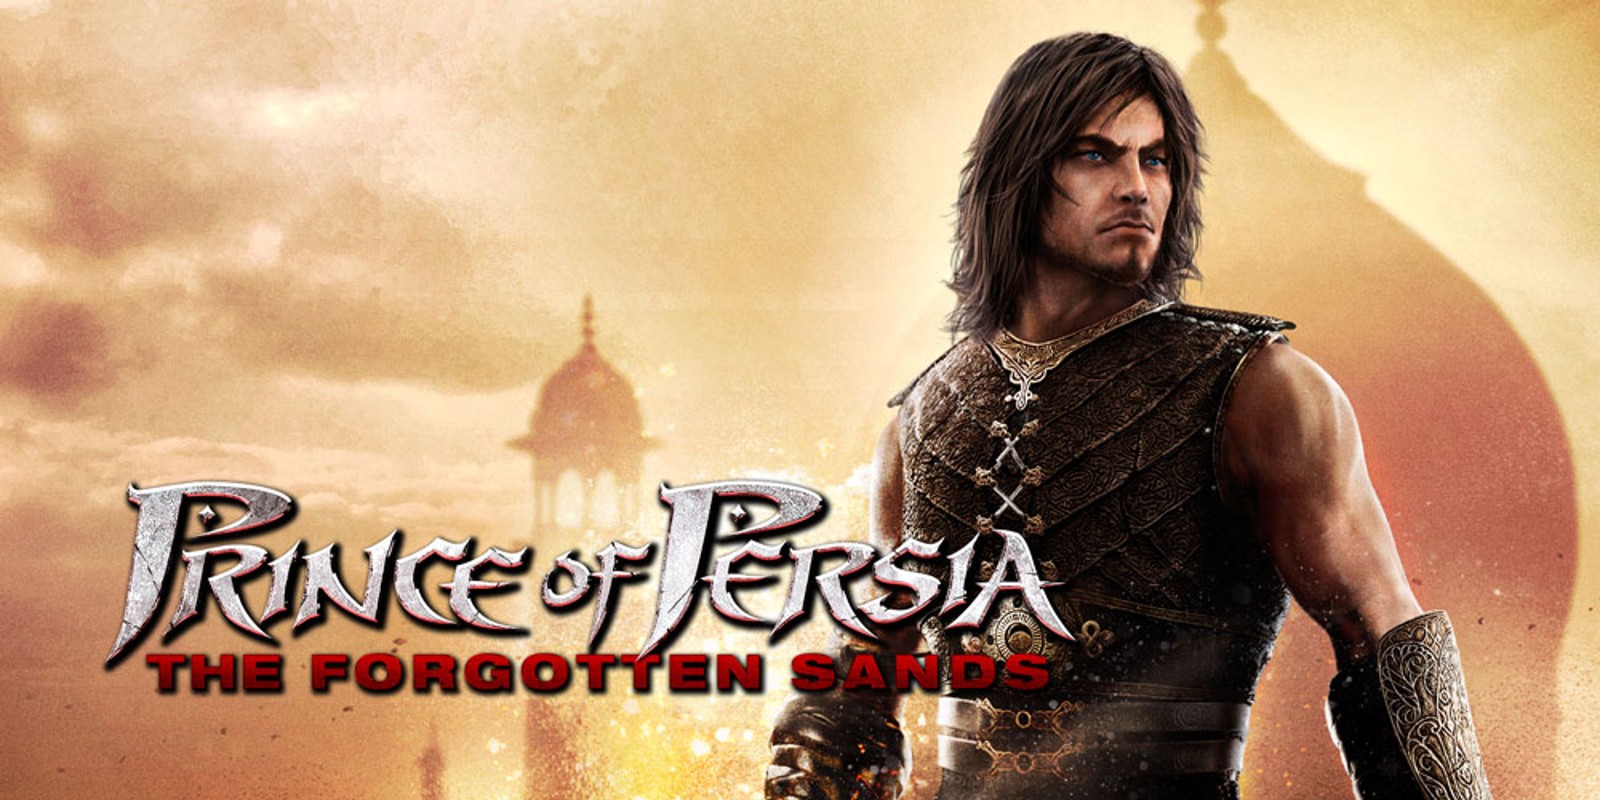 prince of persia: the forgotten sands (wii)